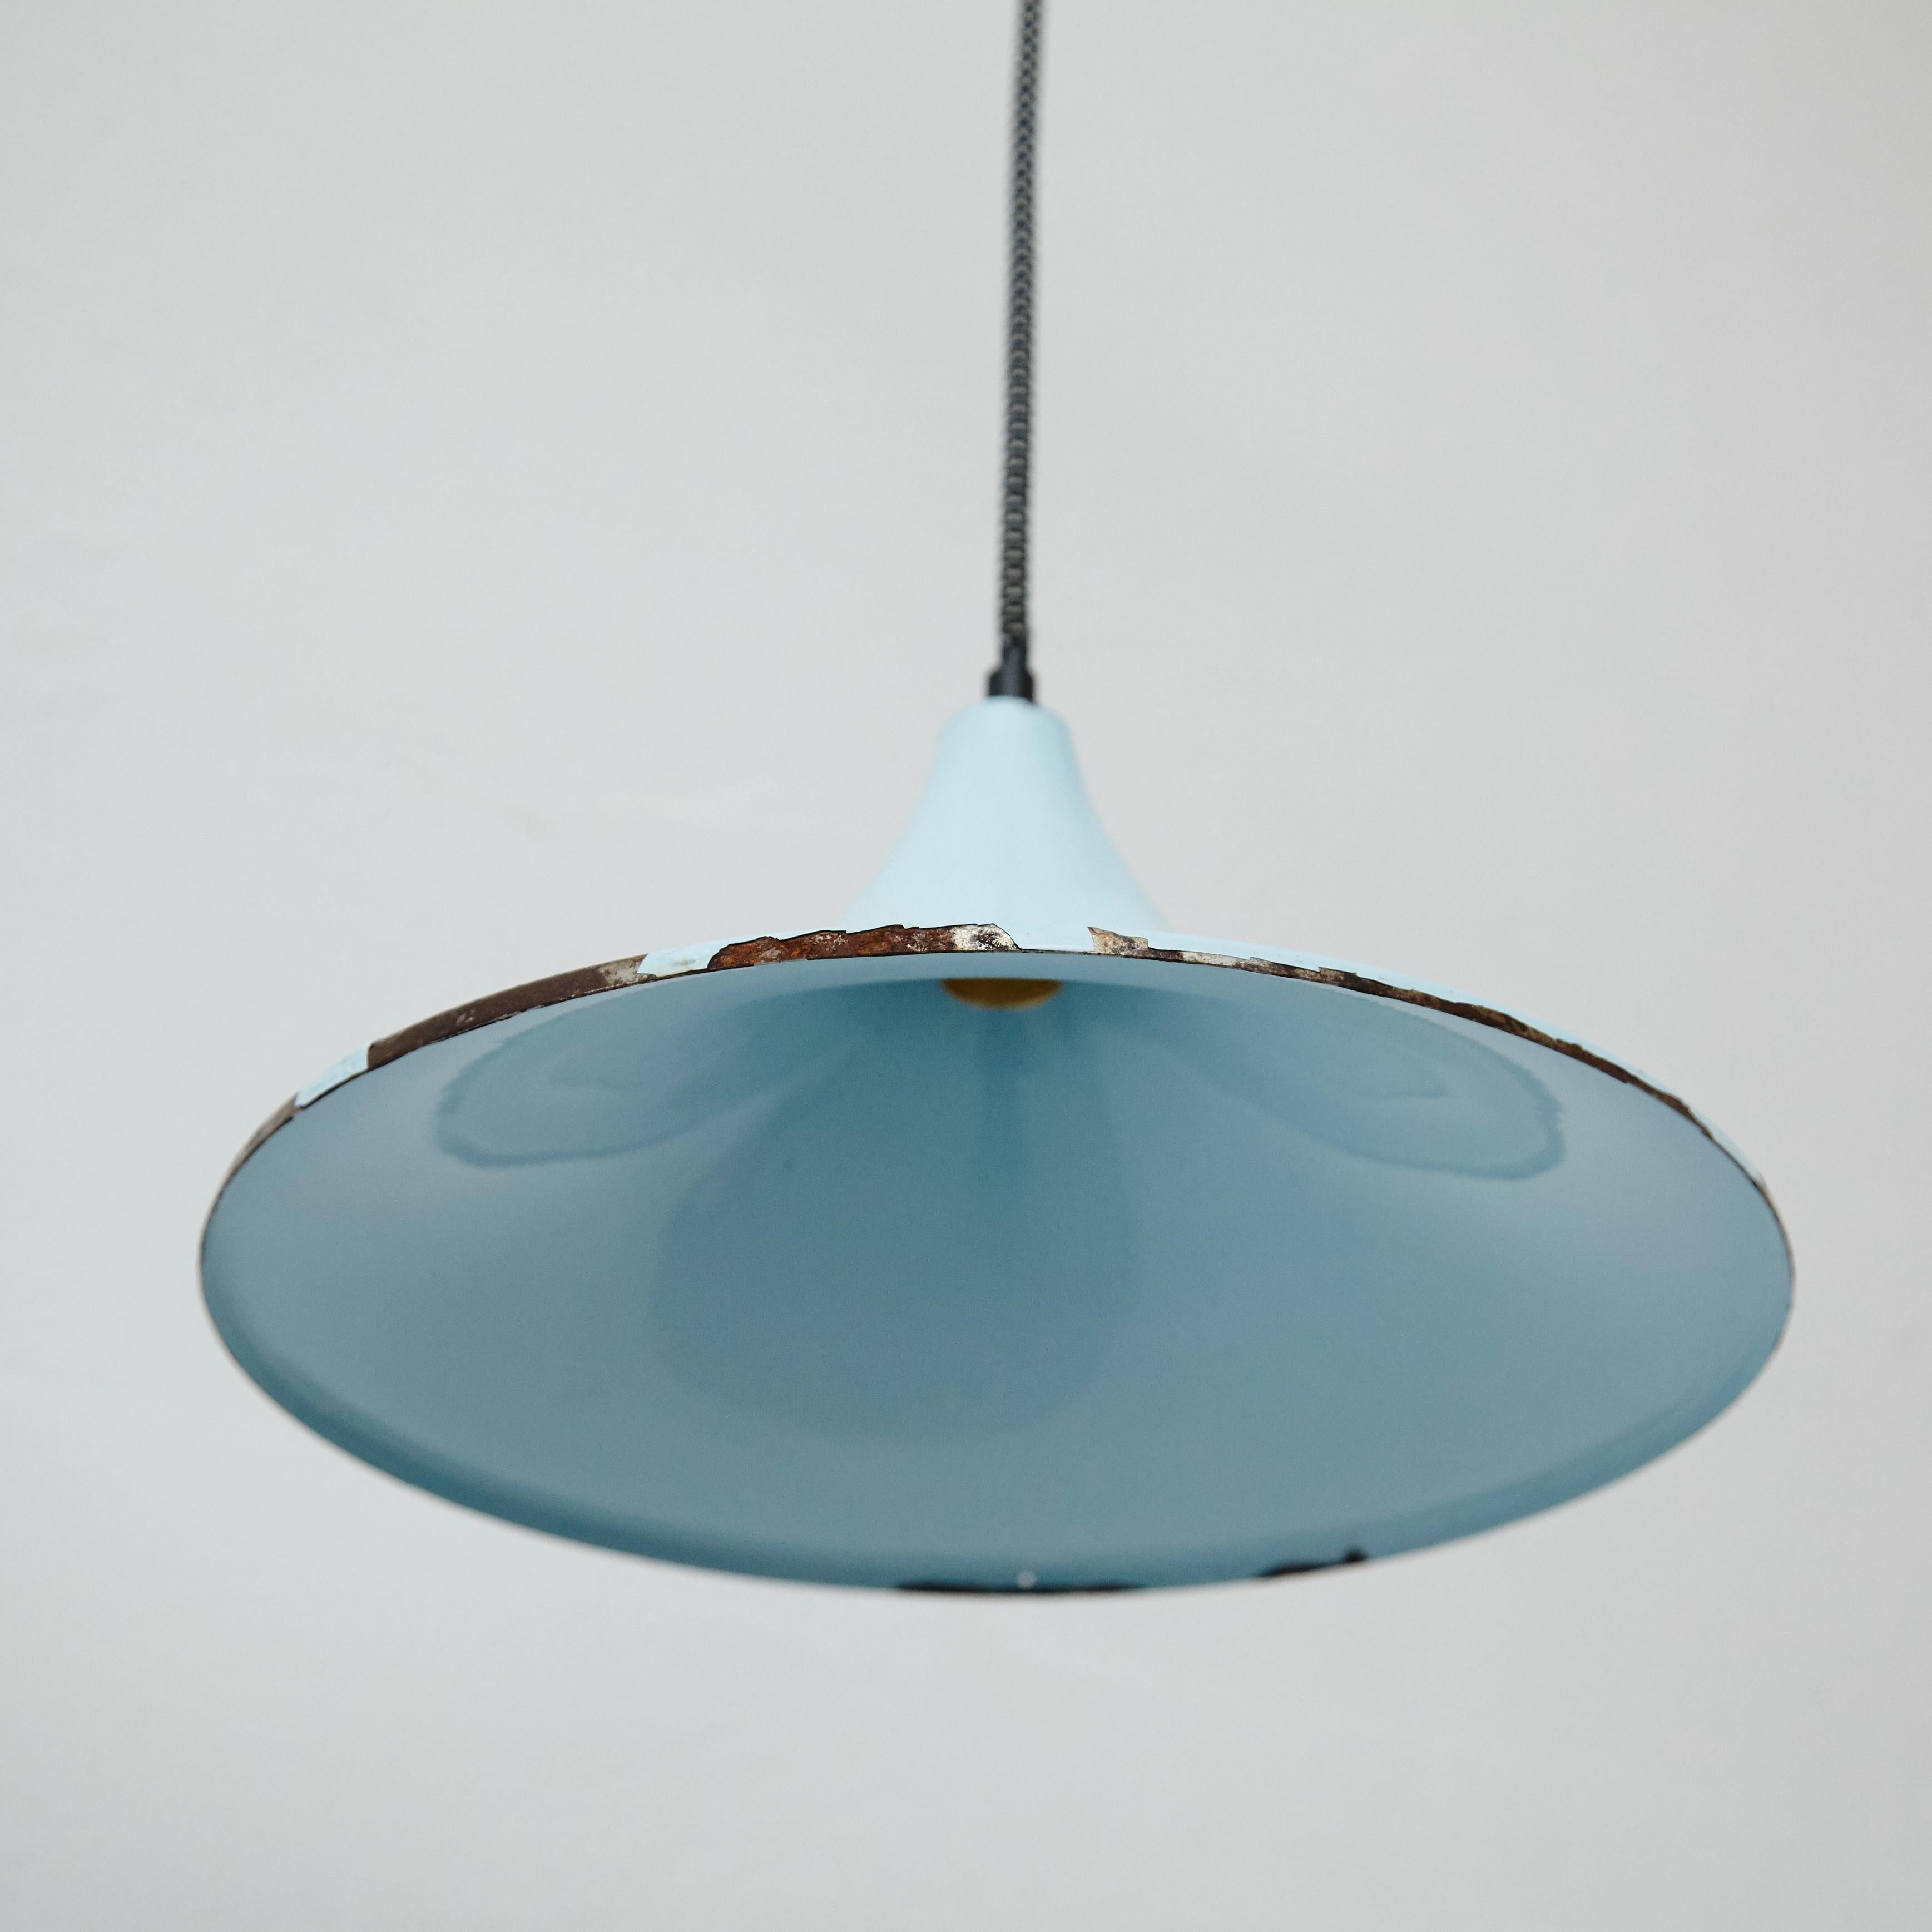 Early 20th century antique clear blue brass ceiling lamp.
By unknown manufacturer, France.
In original condition, with minor wear consistent with age and use, preserving a beautiful patina.

Materials:
Lacquered metal

Dimensions:
ø 32 cm x